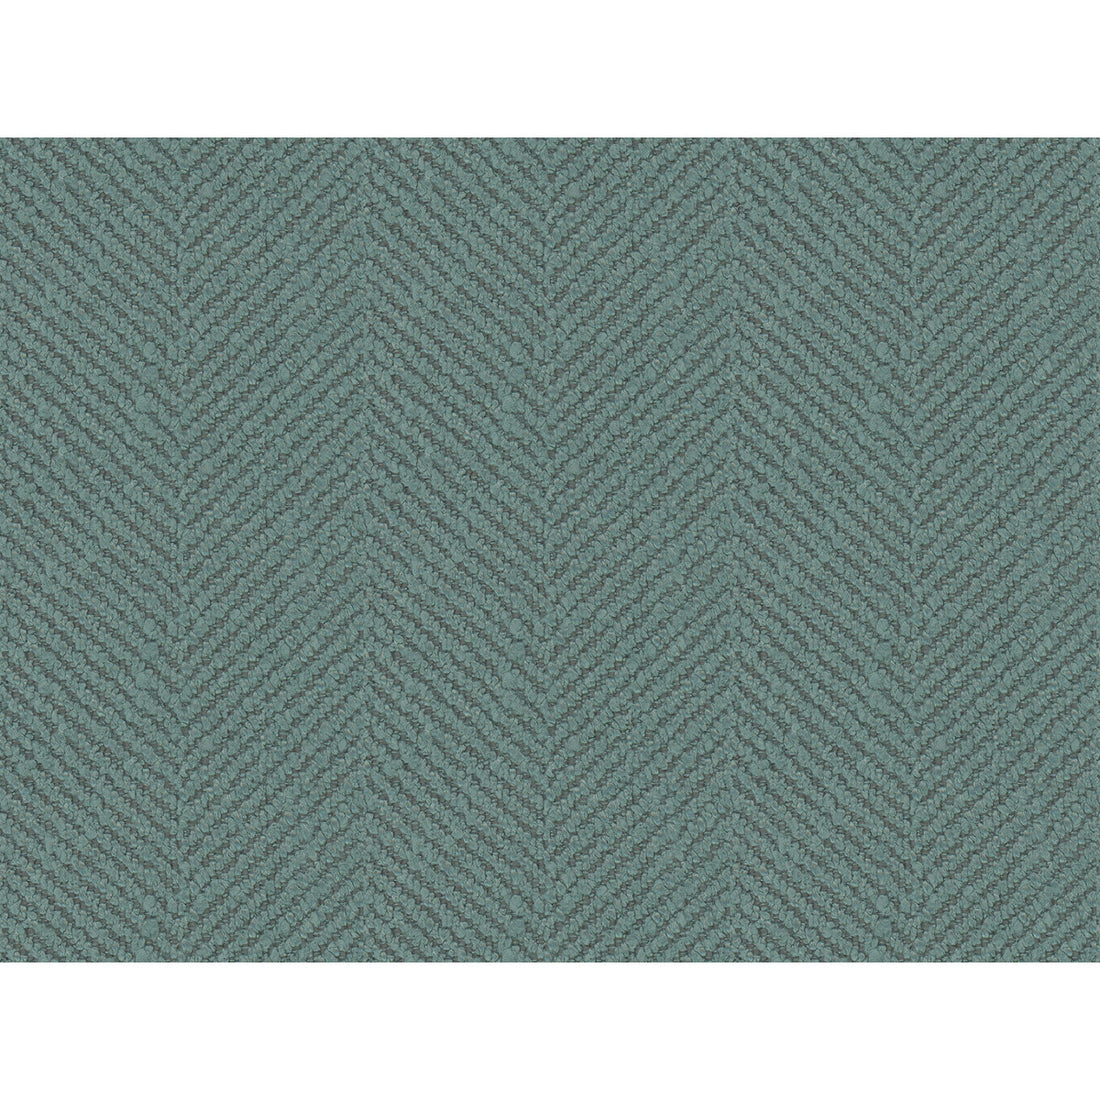 Kravet Smart fabric in 34631-13 color - pattern 34631.13.0 - by Kravet Smart in the Performance Crypton Home collection